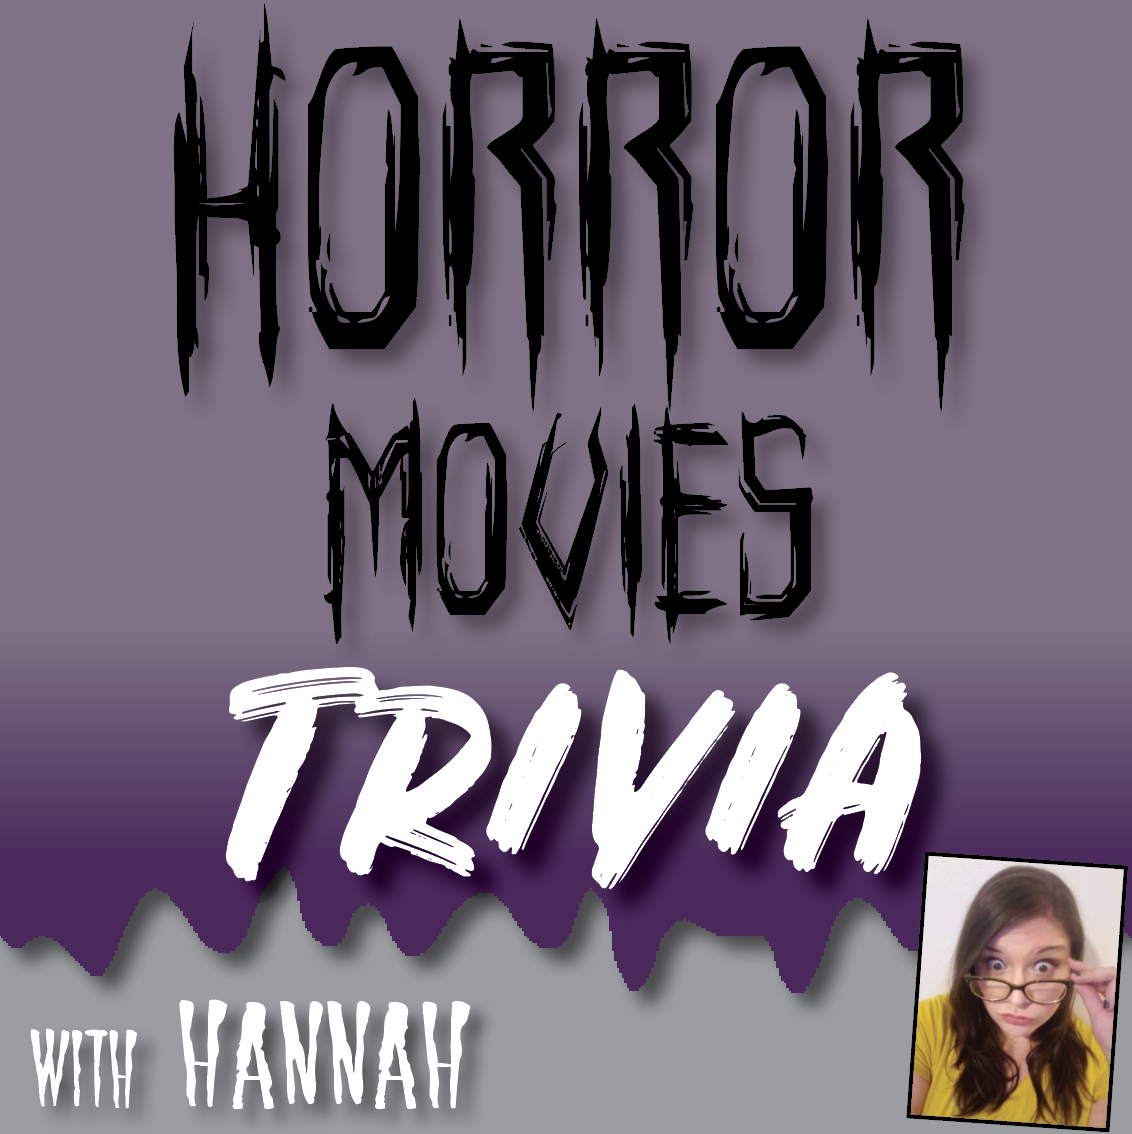 A Horror Movies Trivia experience project by Yaymaker